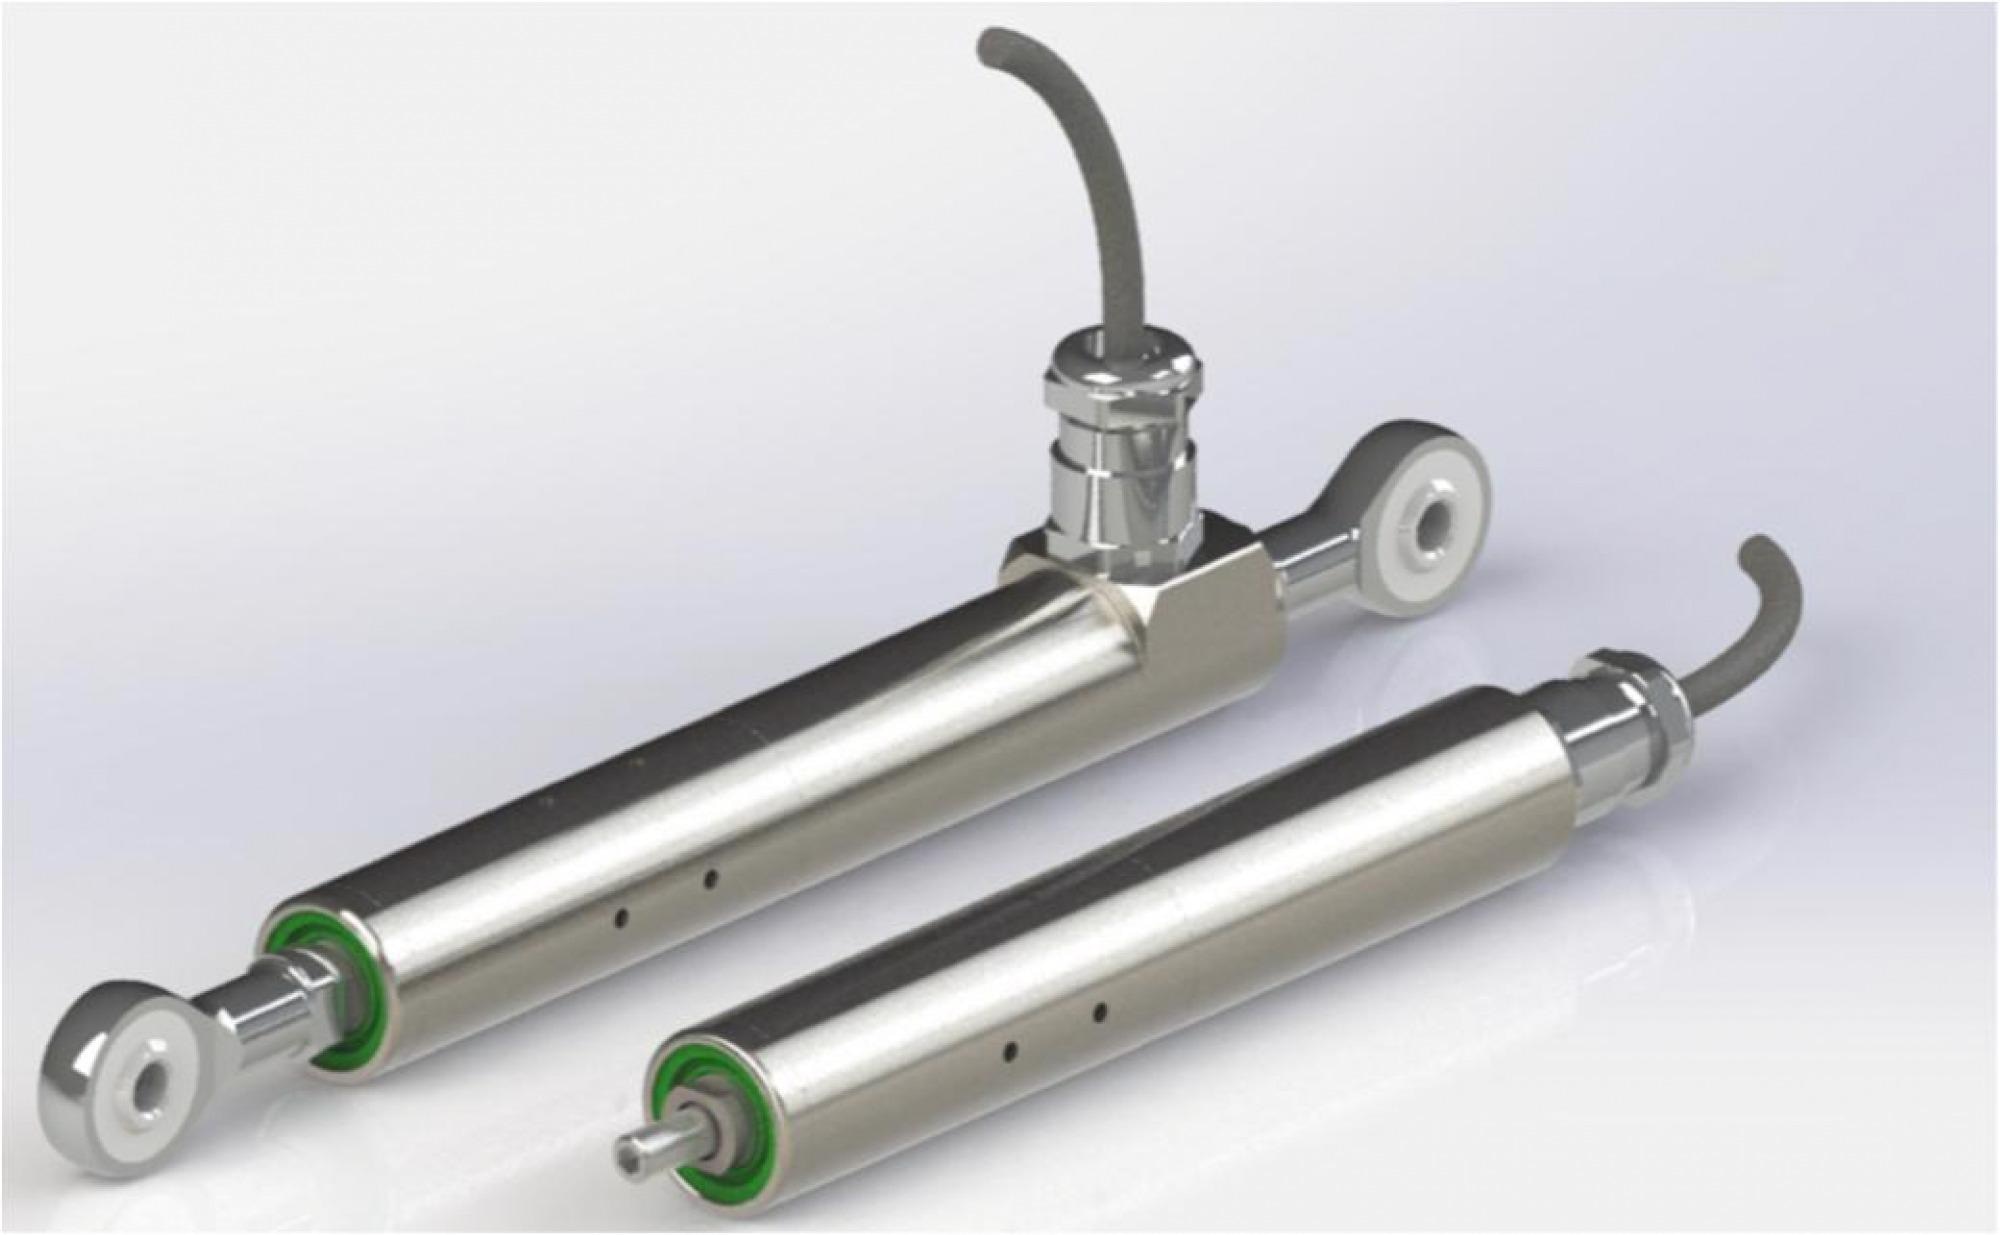 Positek’s New S119 Series Precision Linear Position Sensor is Submersible and Compact